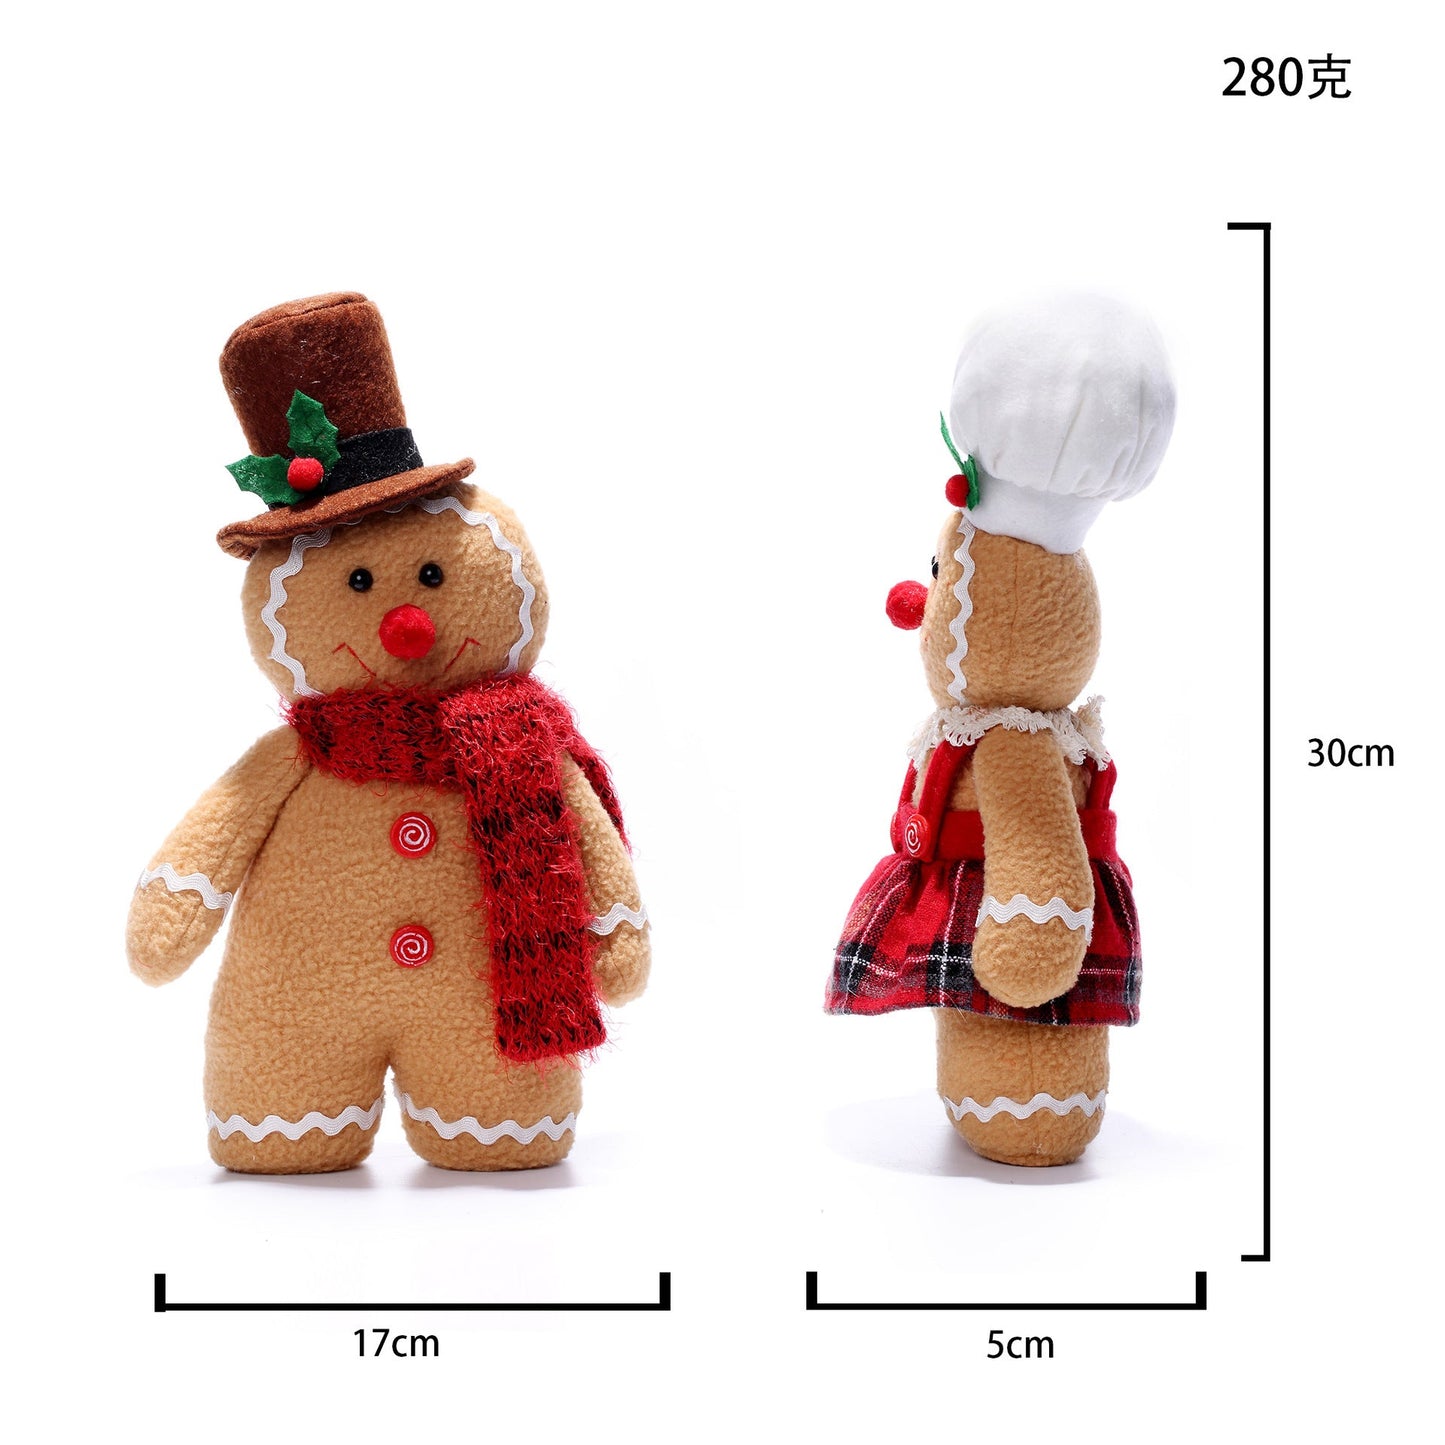 Gingerbread Man and Woman Christmas Doll